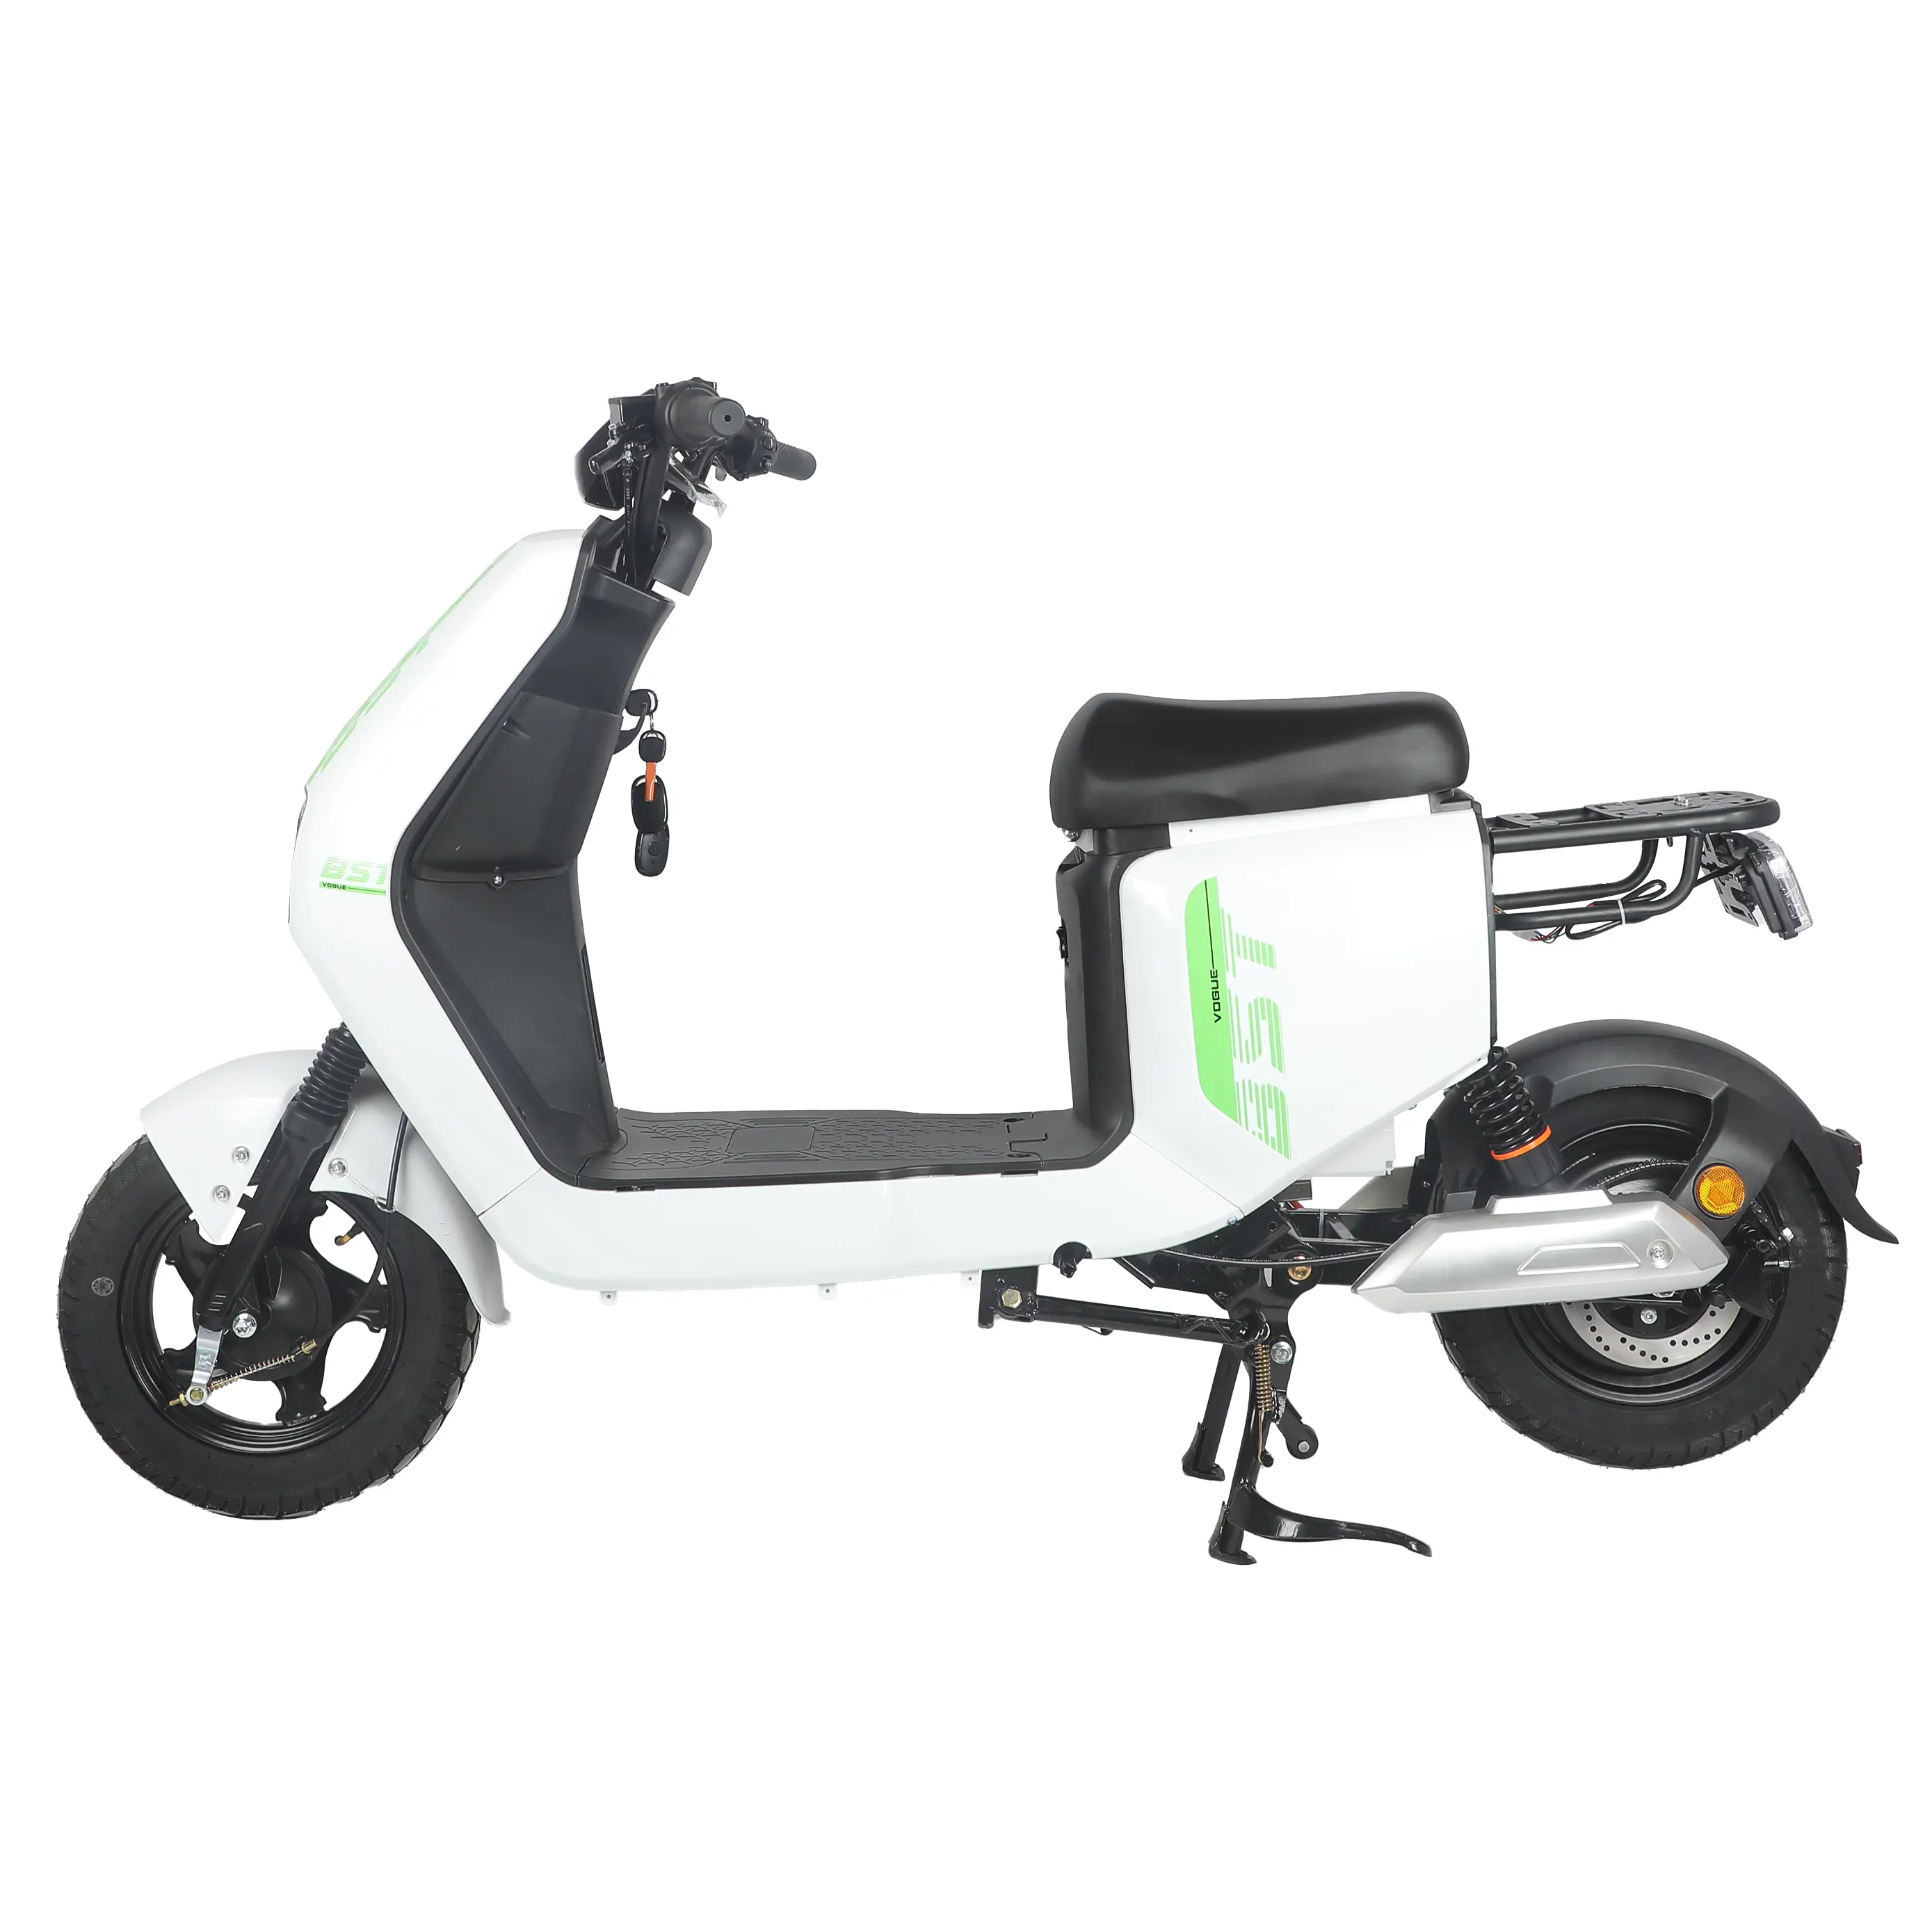 electric motorcycle electric moped scooter bicycle electric scooter for adults Best Quality